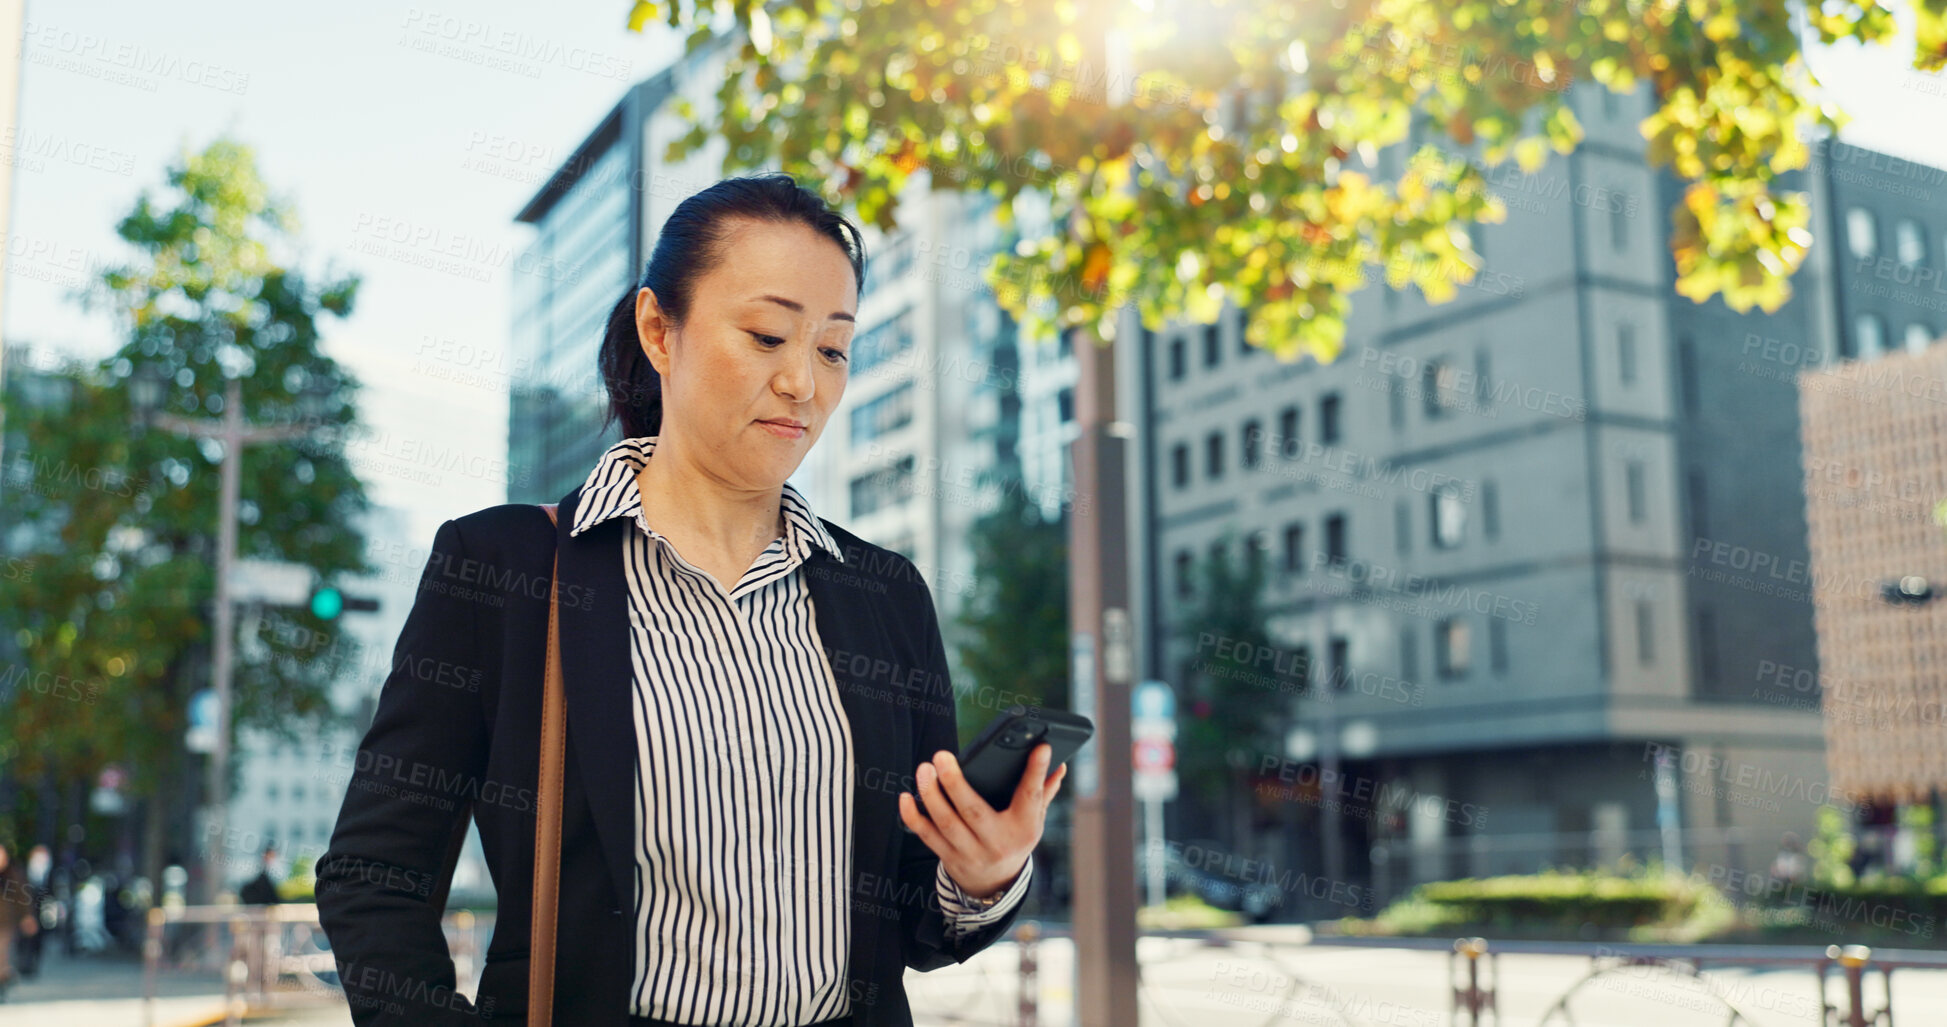 Buy stock photo Cellphone, walking and business woman in the city networking on social media, mobile app or internet. Technology, street and professional Asian female person with phone commuting in street in town.